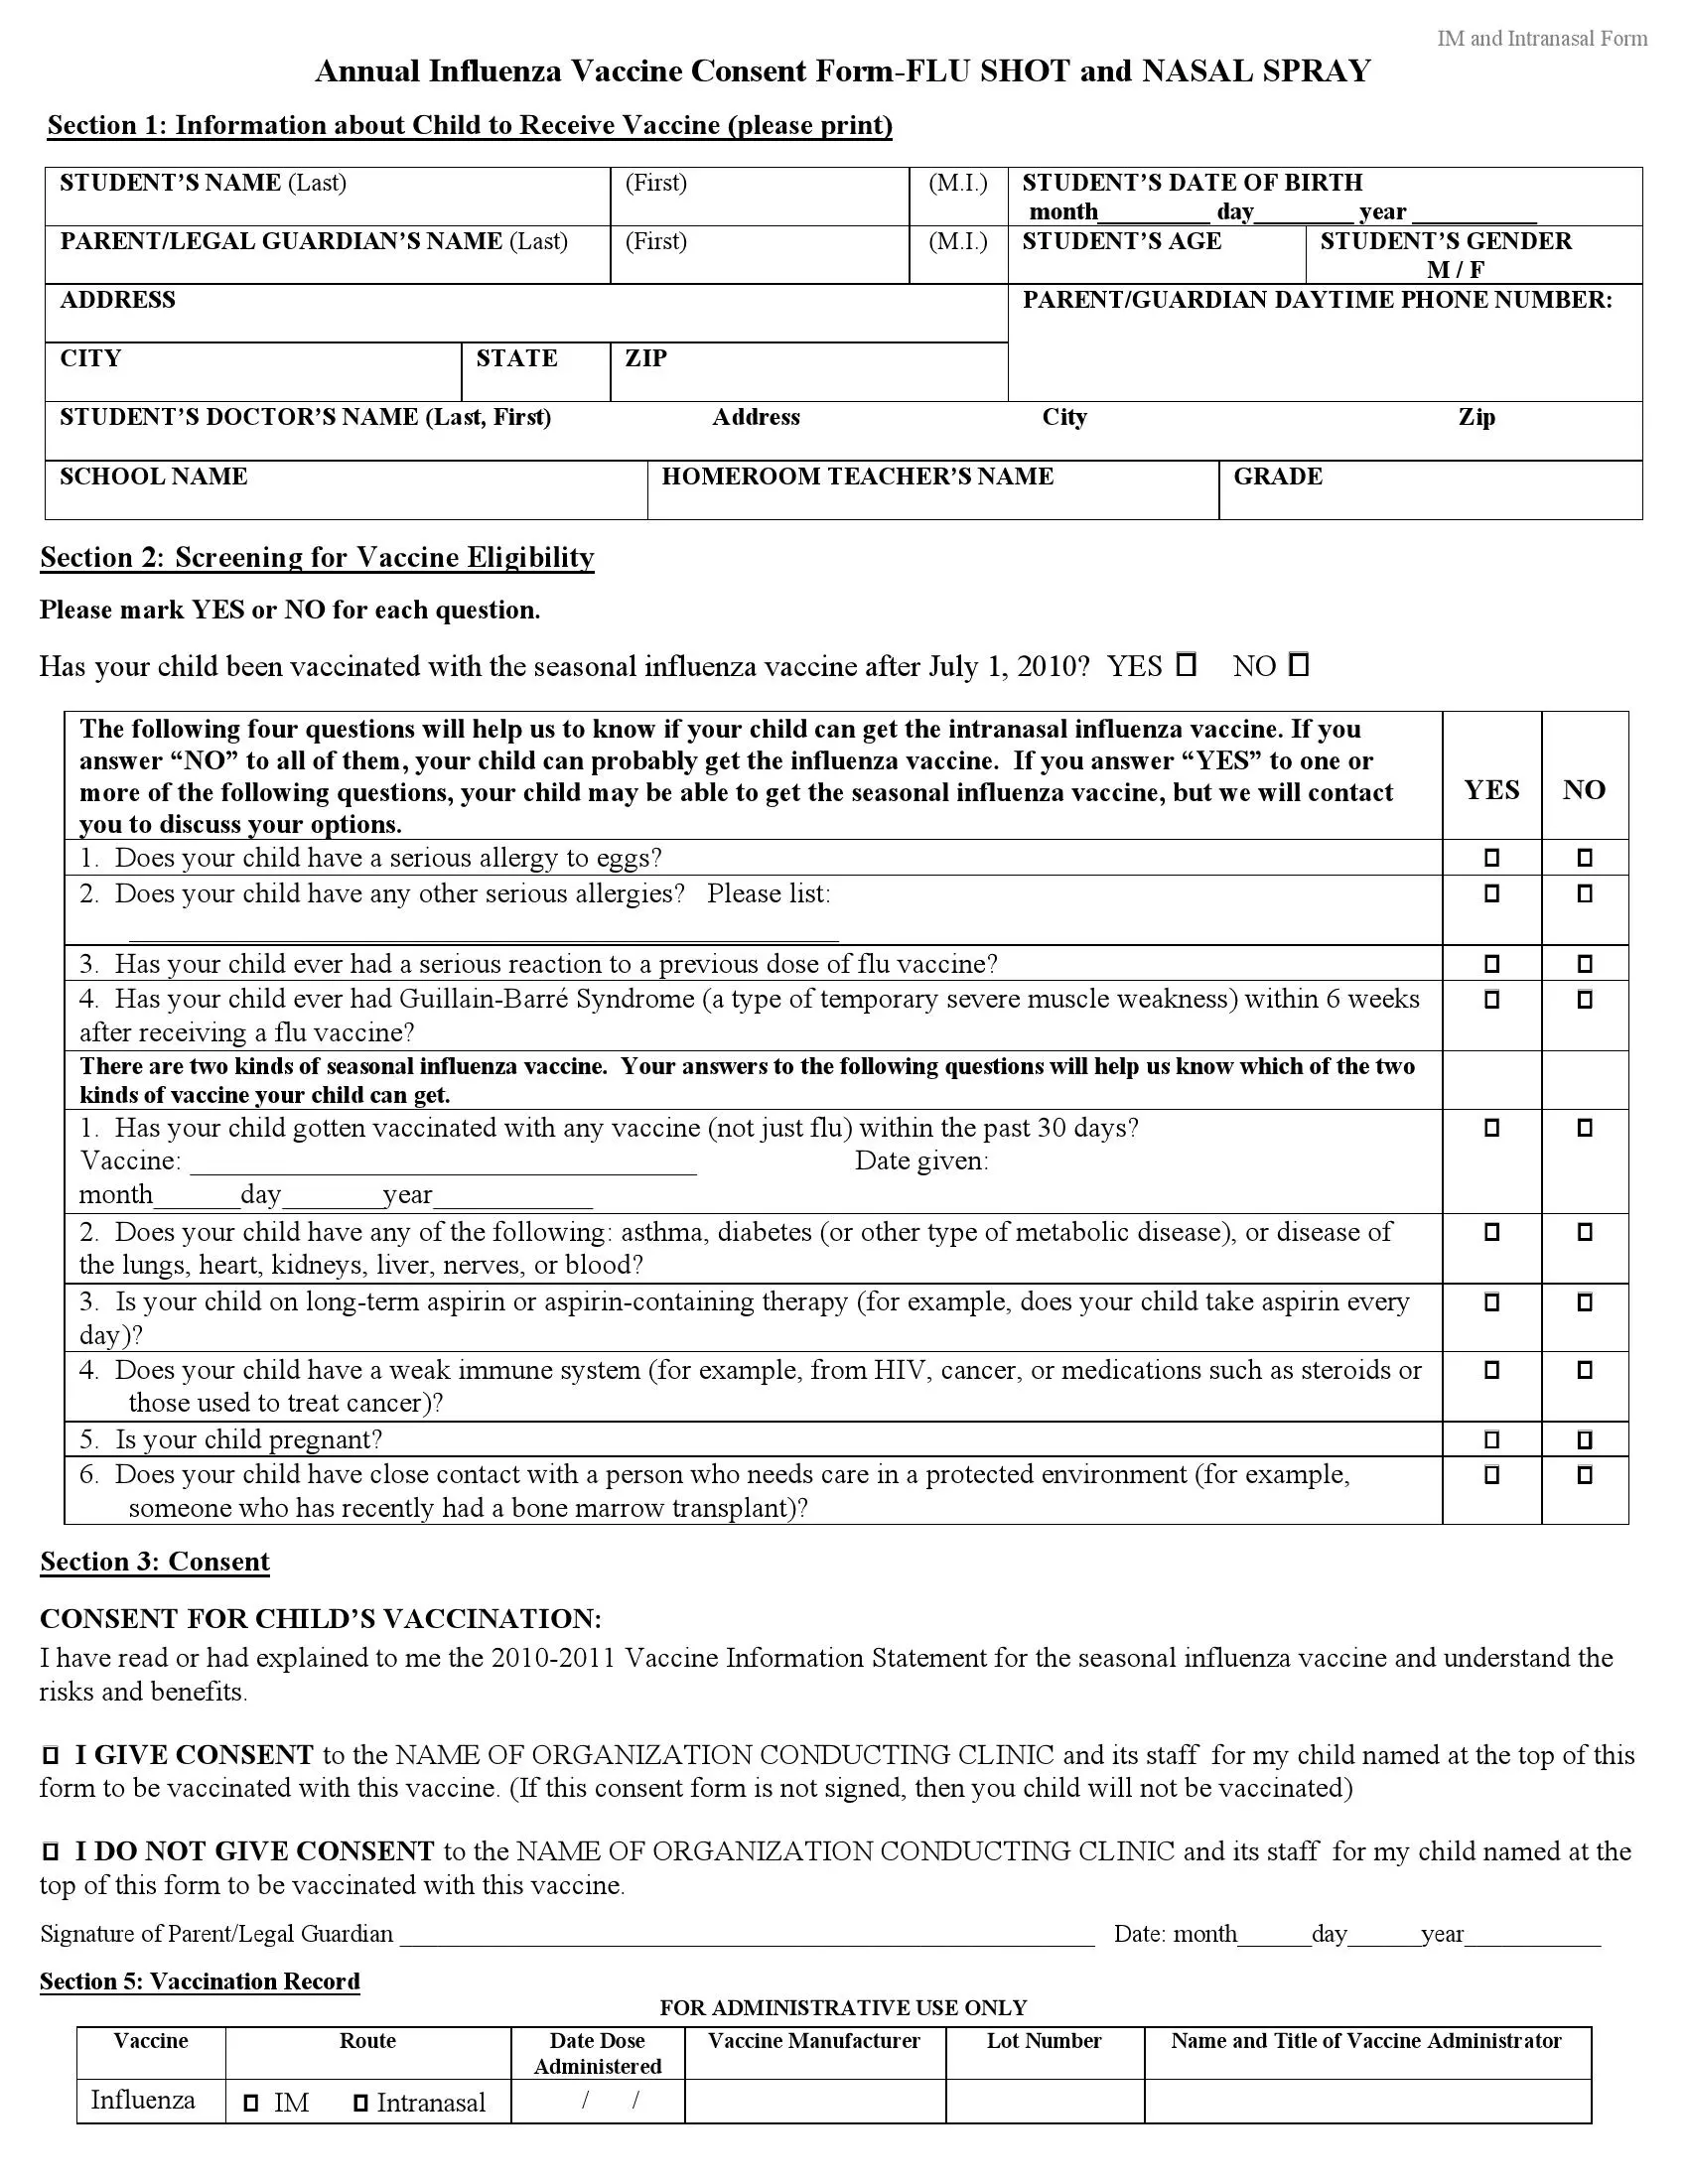 cdc flu shot consent form preview